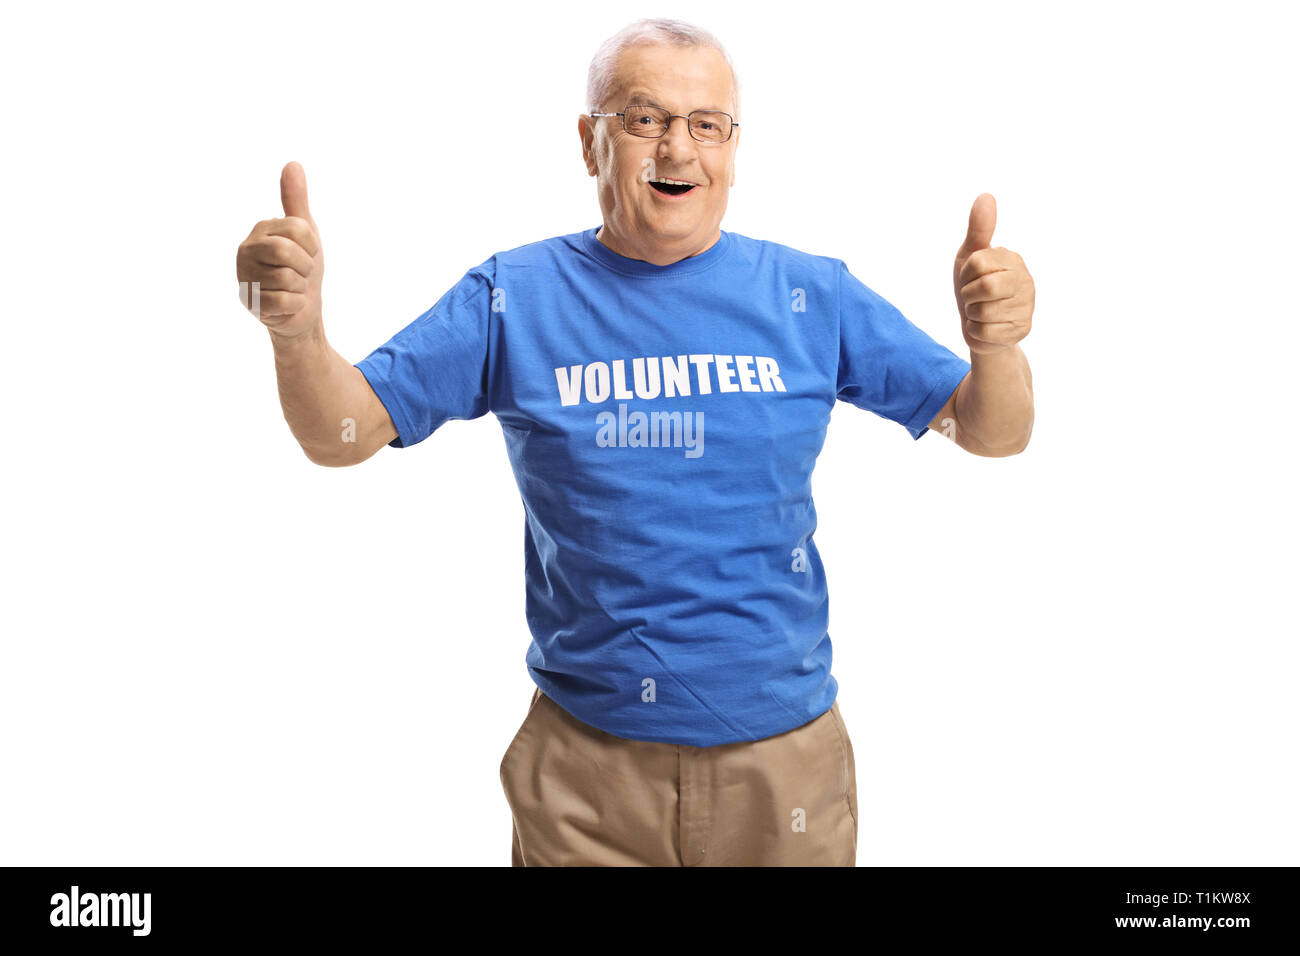 Cheerful mature male volunteer giving thumbs up isolated on white background Stock Photo